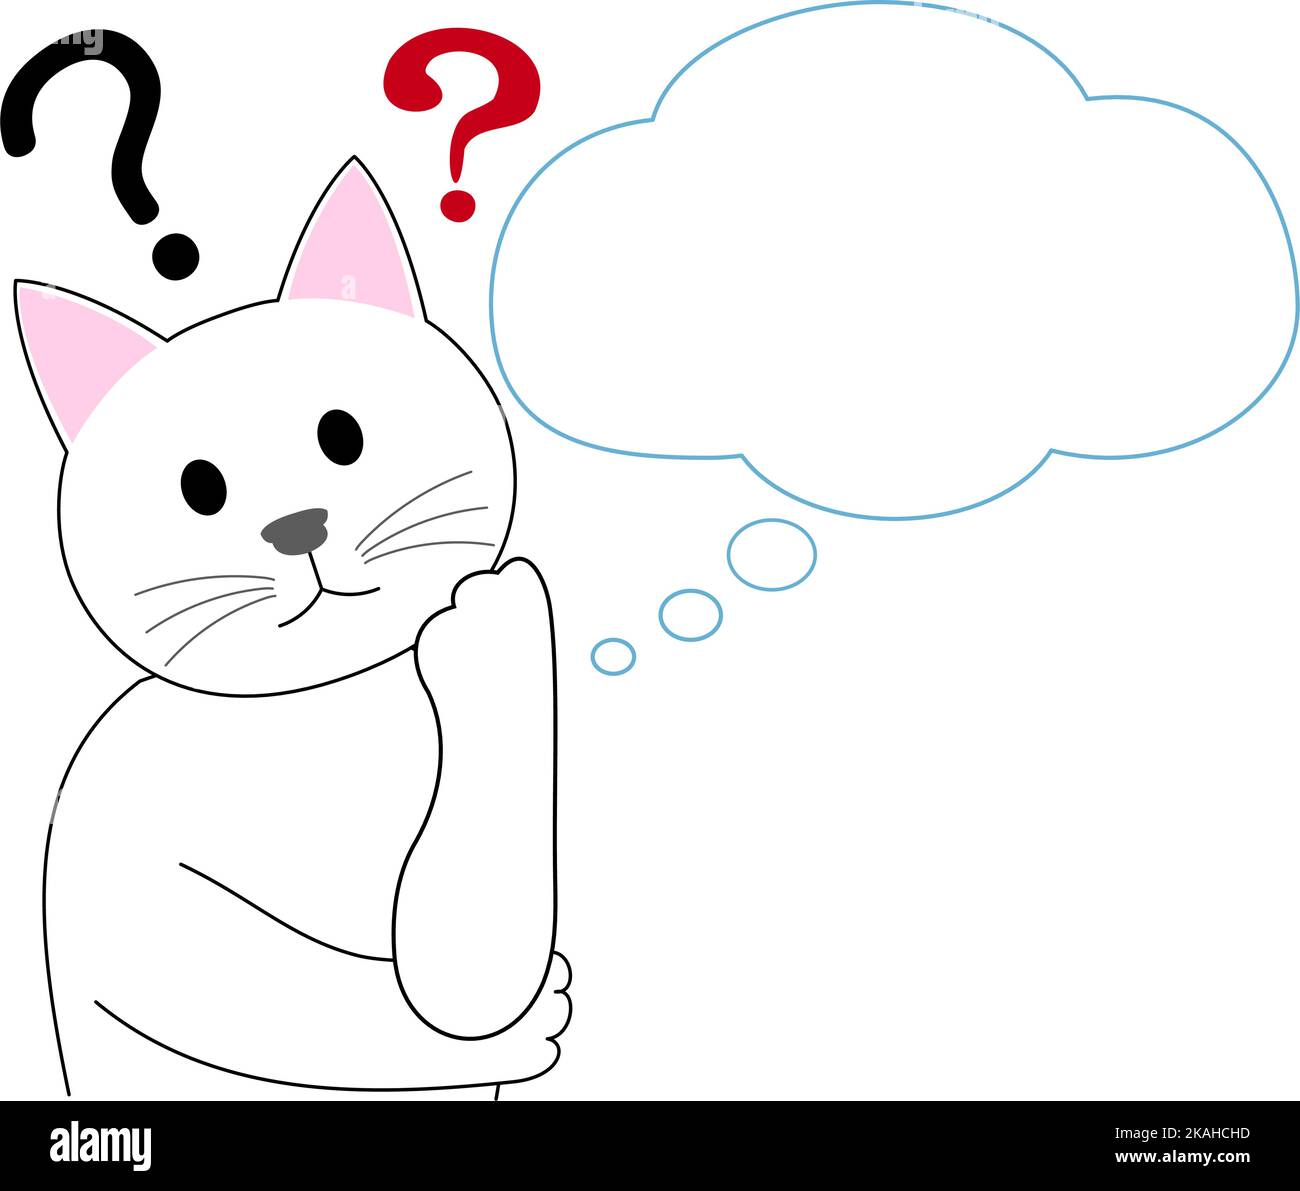 A White Kitten that doesn’t have an answer. Stock Vector